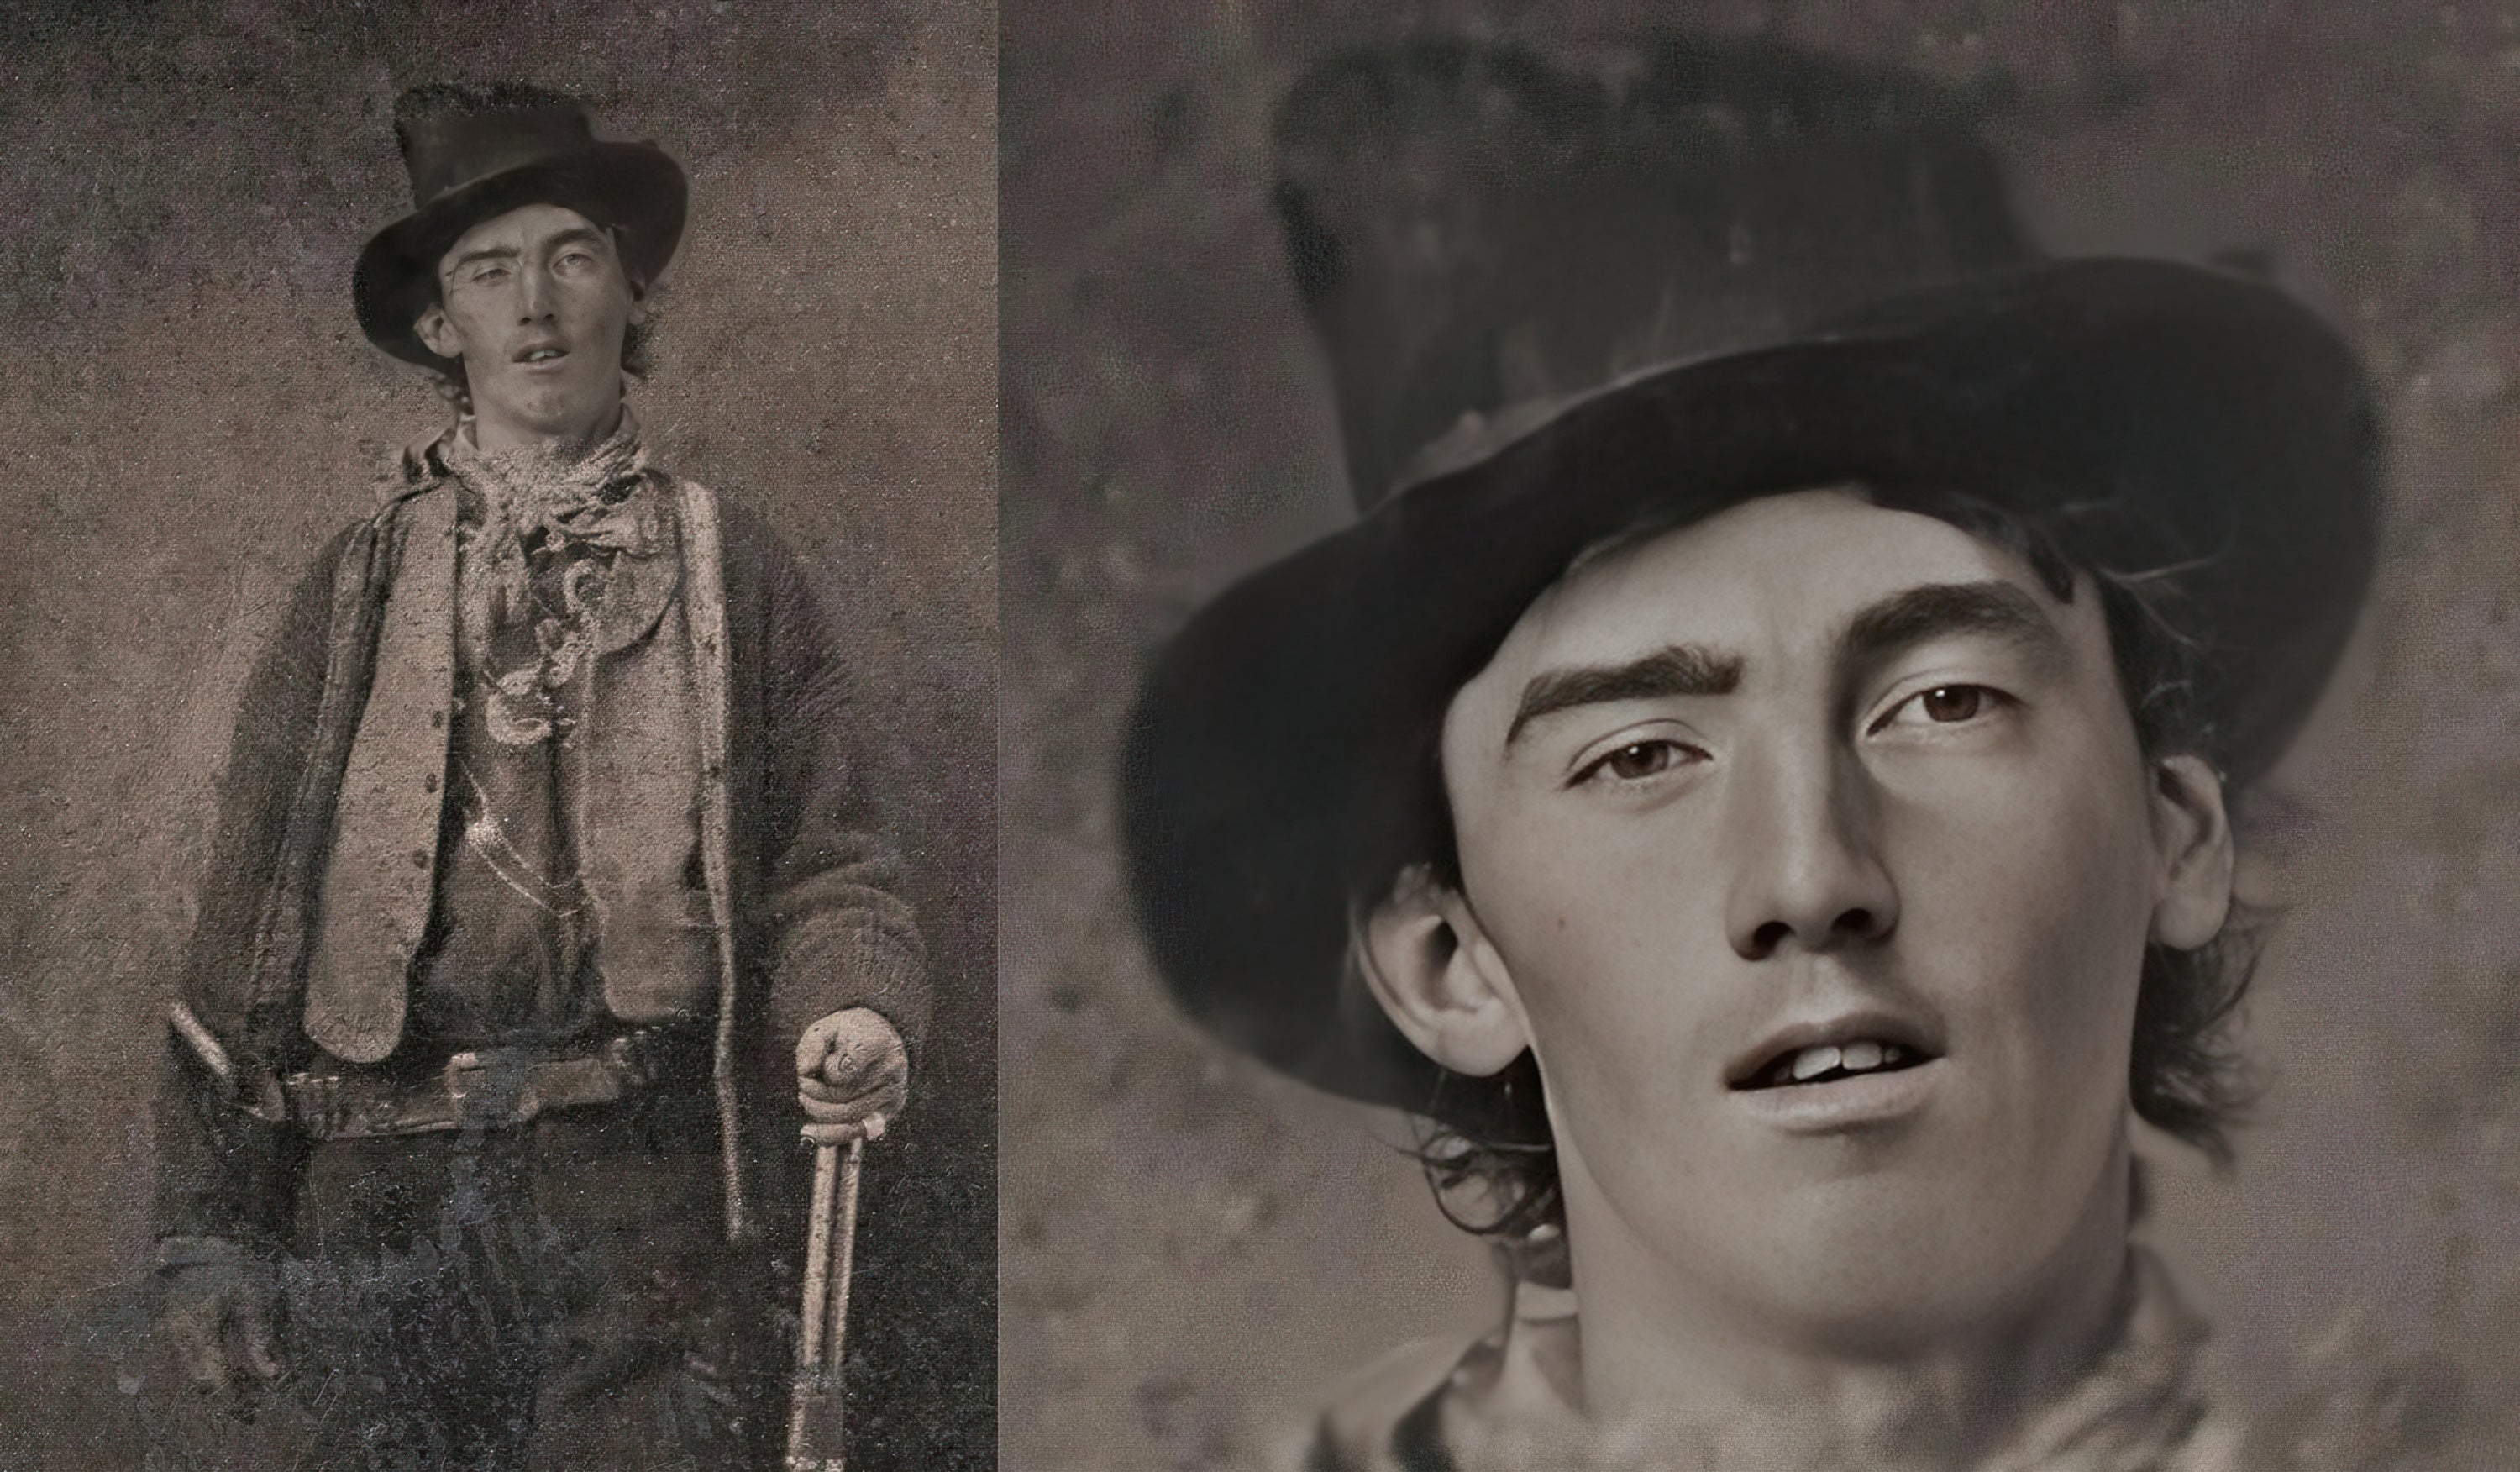 Billy the Kid: The Endless Ride (the true story depicted in the film "Young Guns")